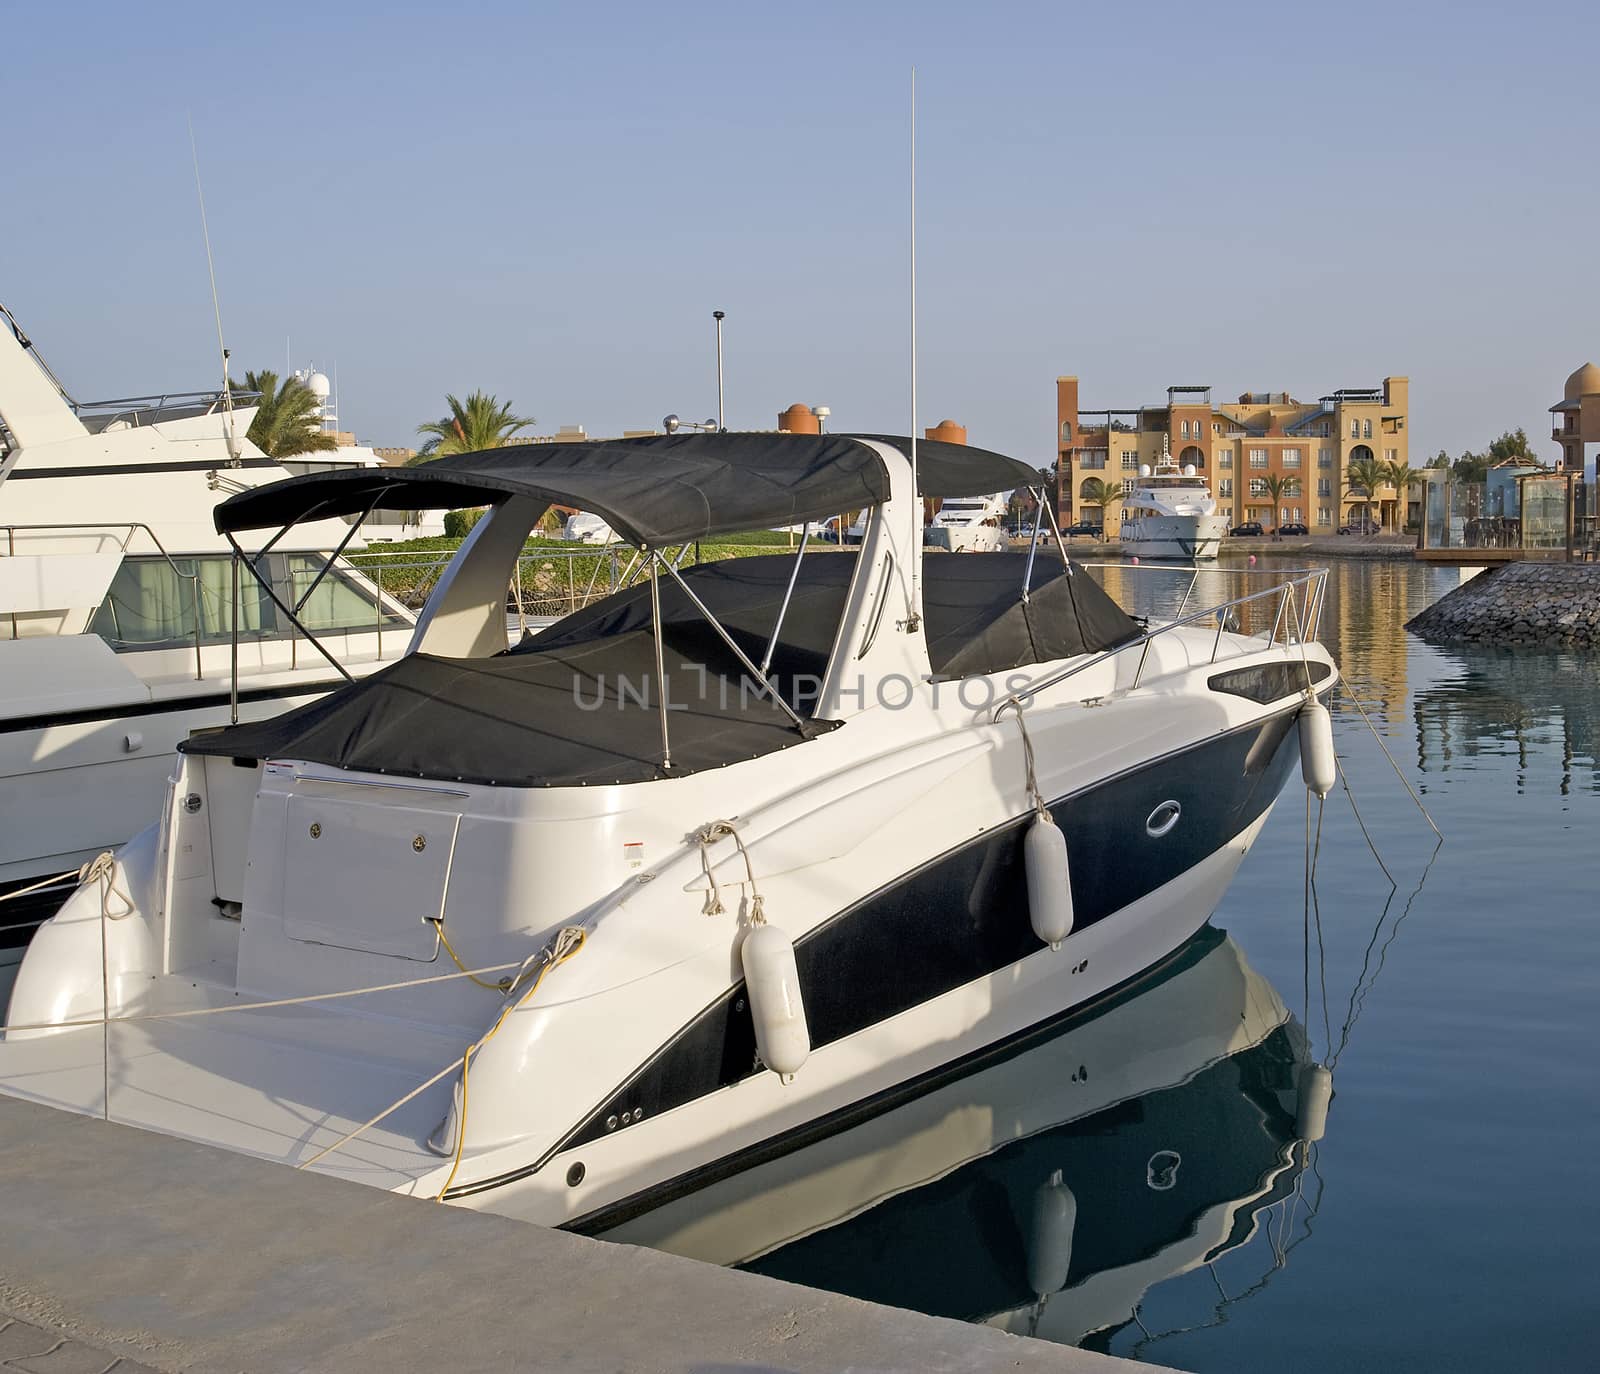 Luxury motor yachts moored up in a marina